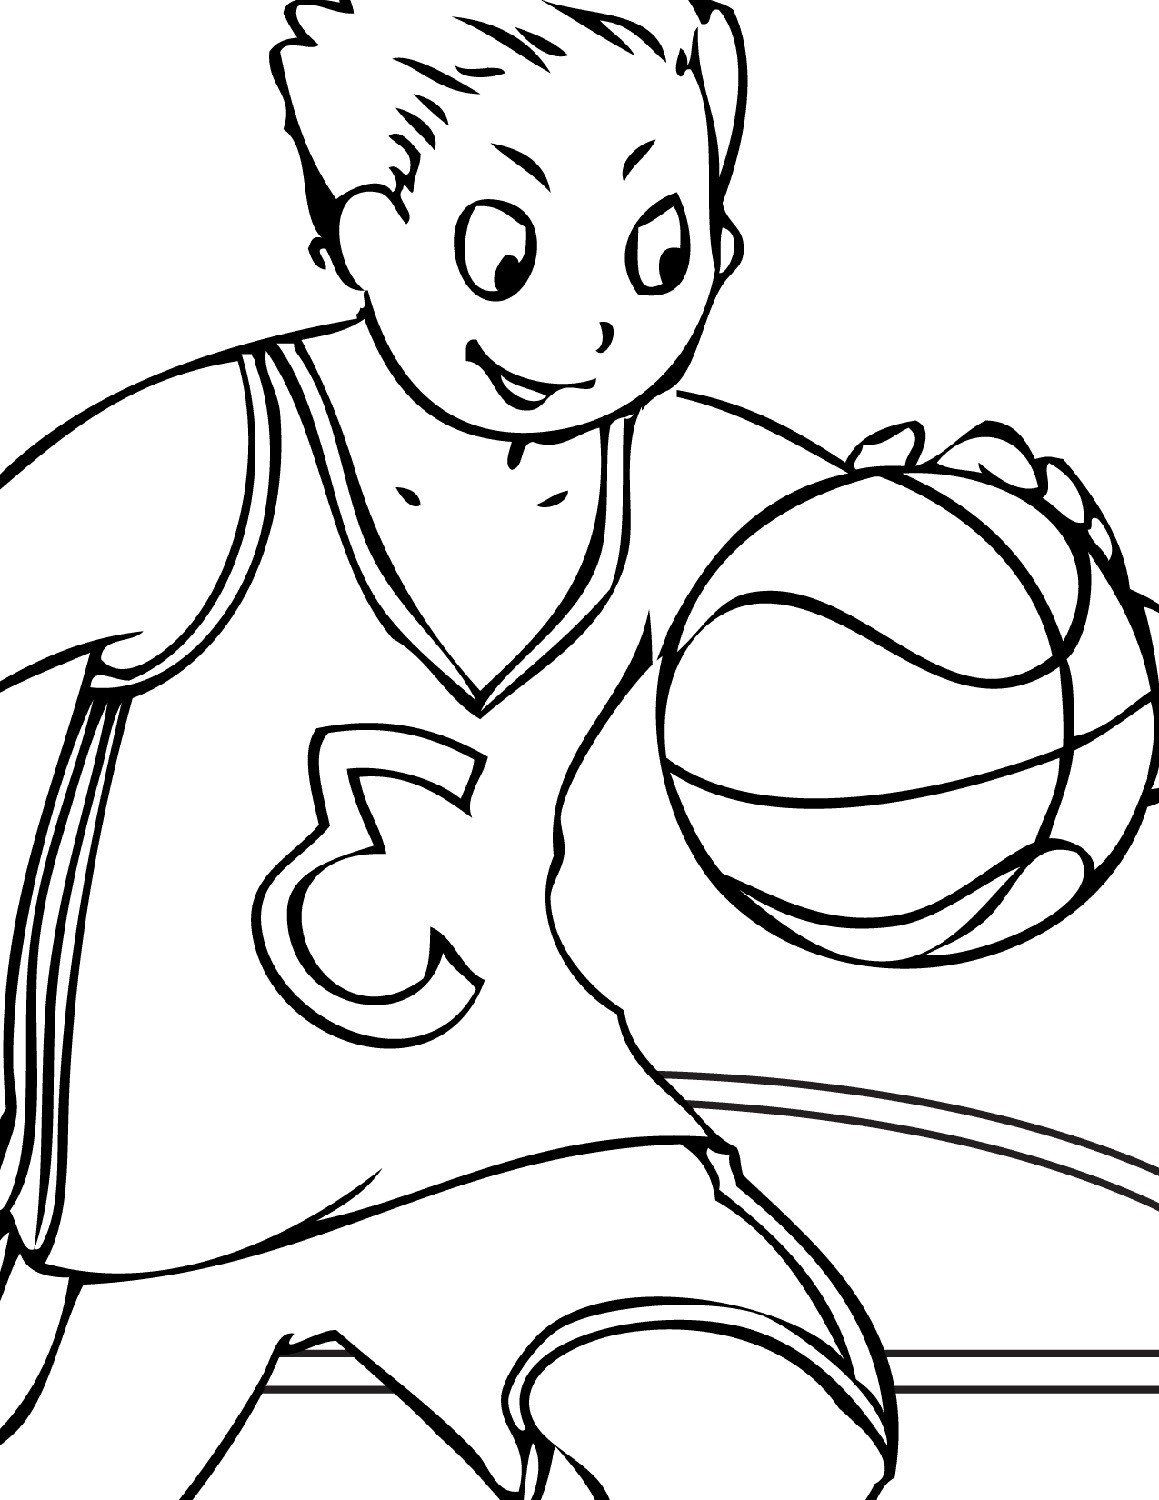 Pin on Printable Coloring Pages Template